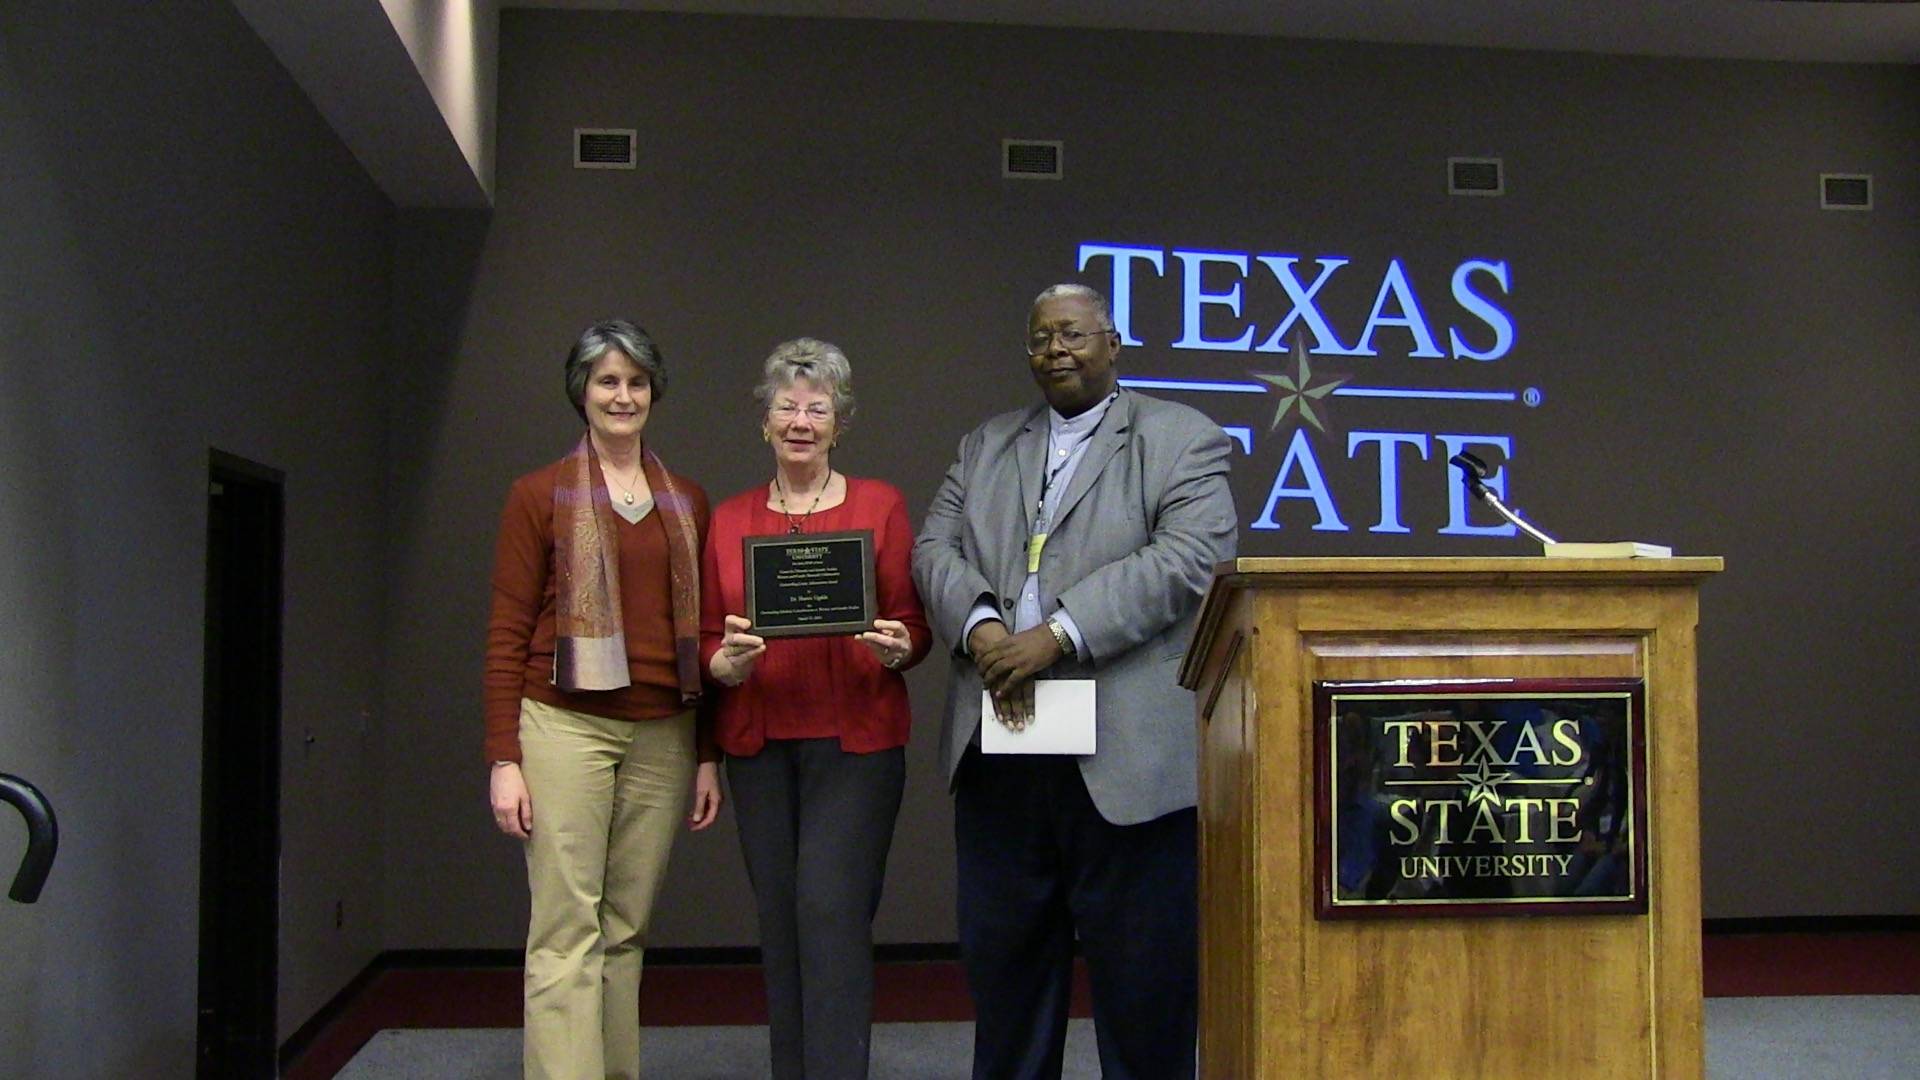 Dr. Sharon Ugalde receiving award, along with Dr. Catherine Jaffe, and Dr. Audwin Anderson